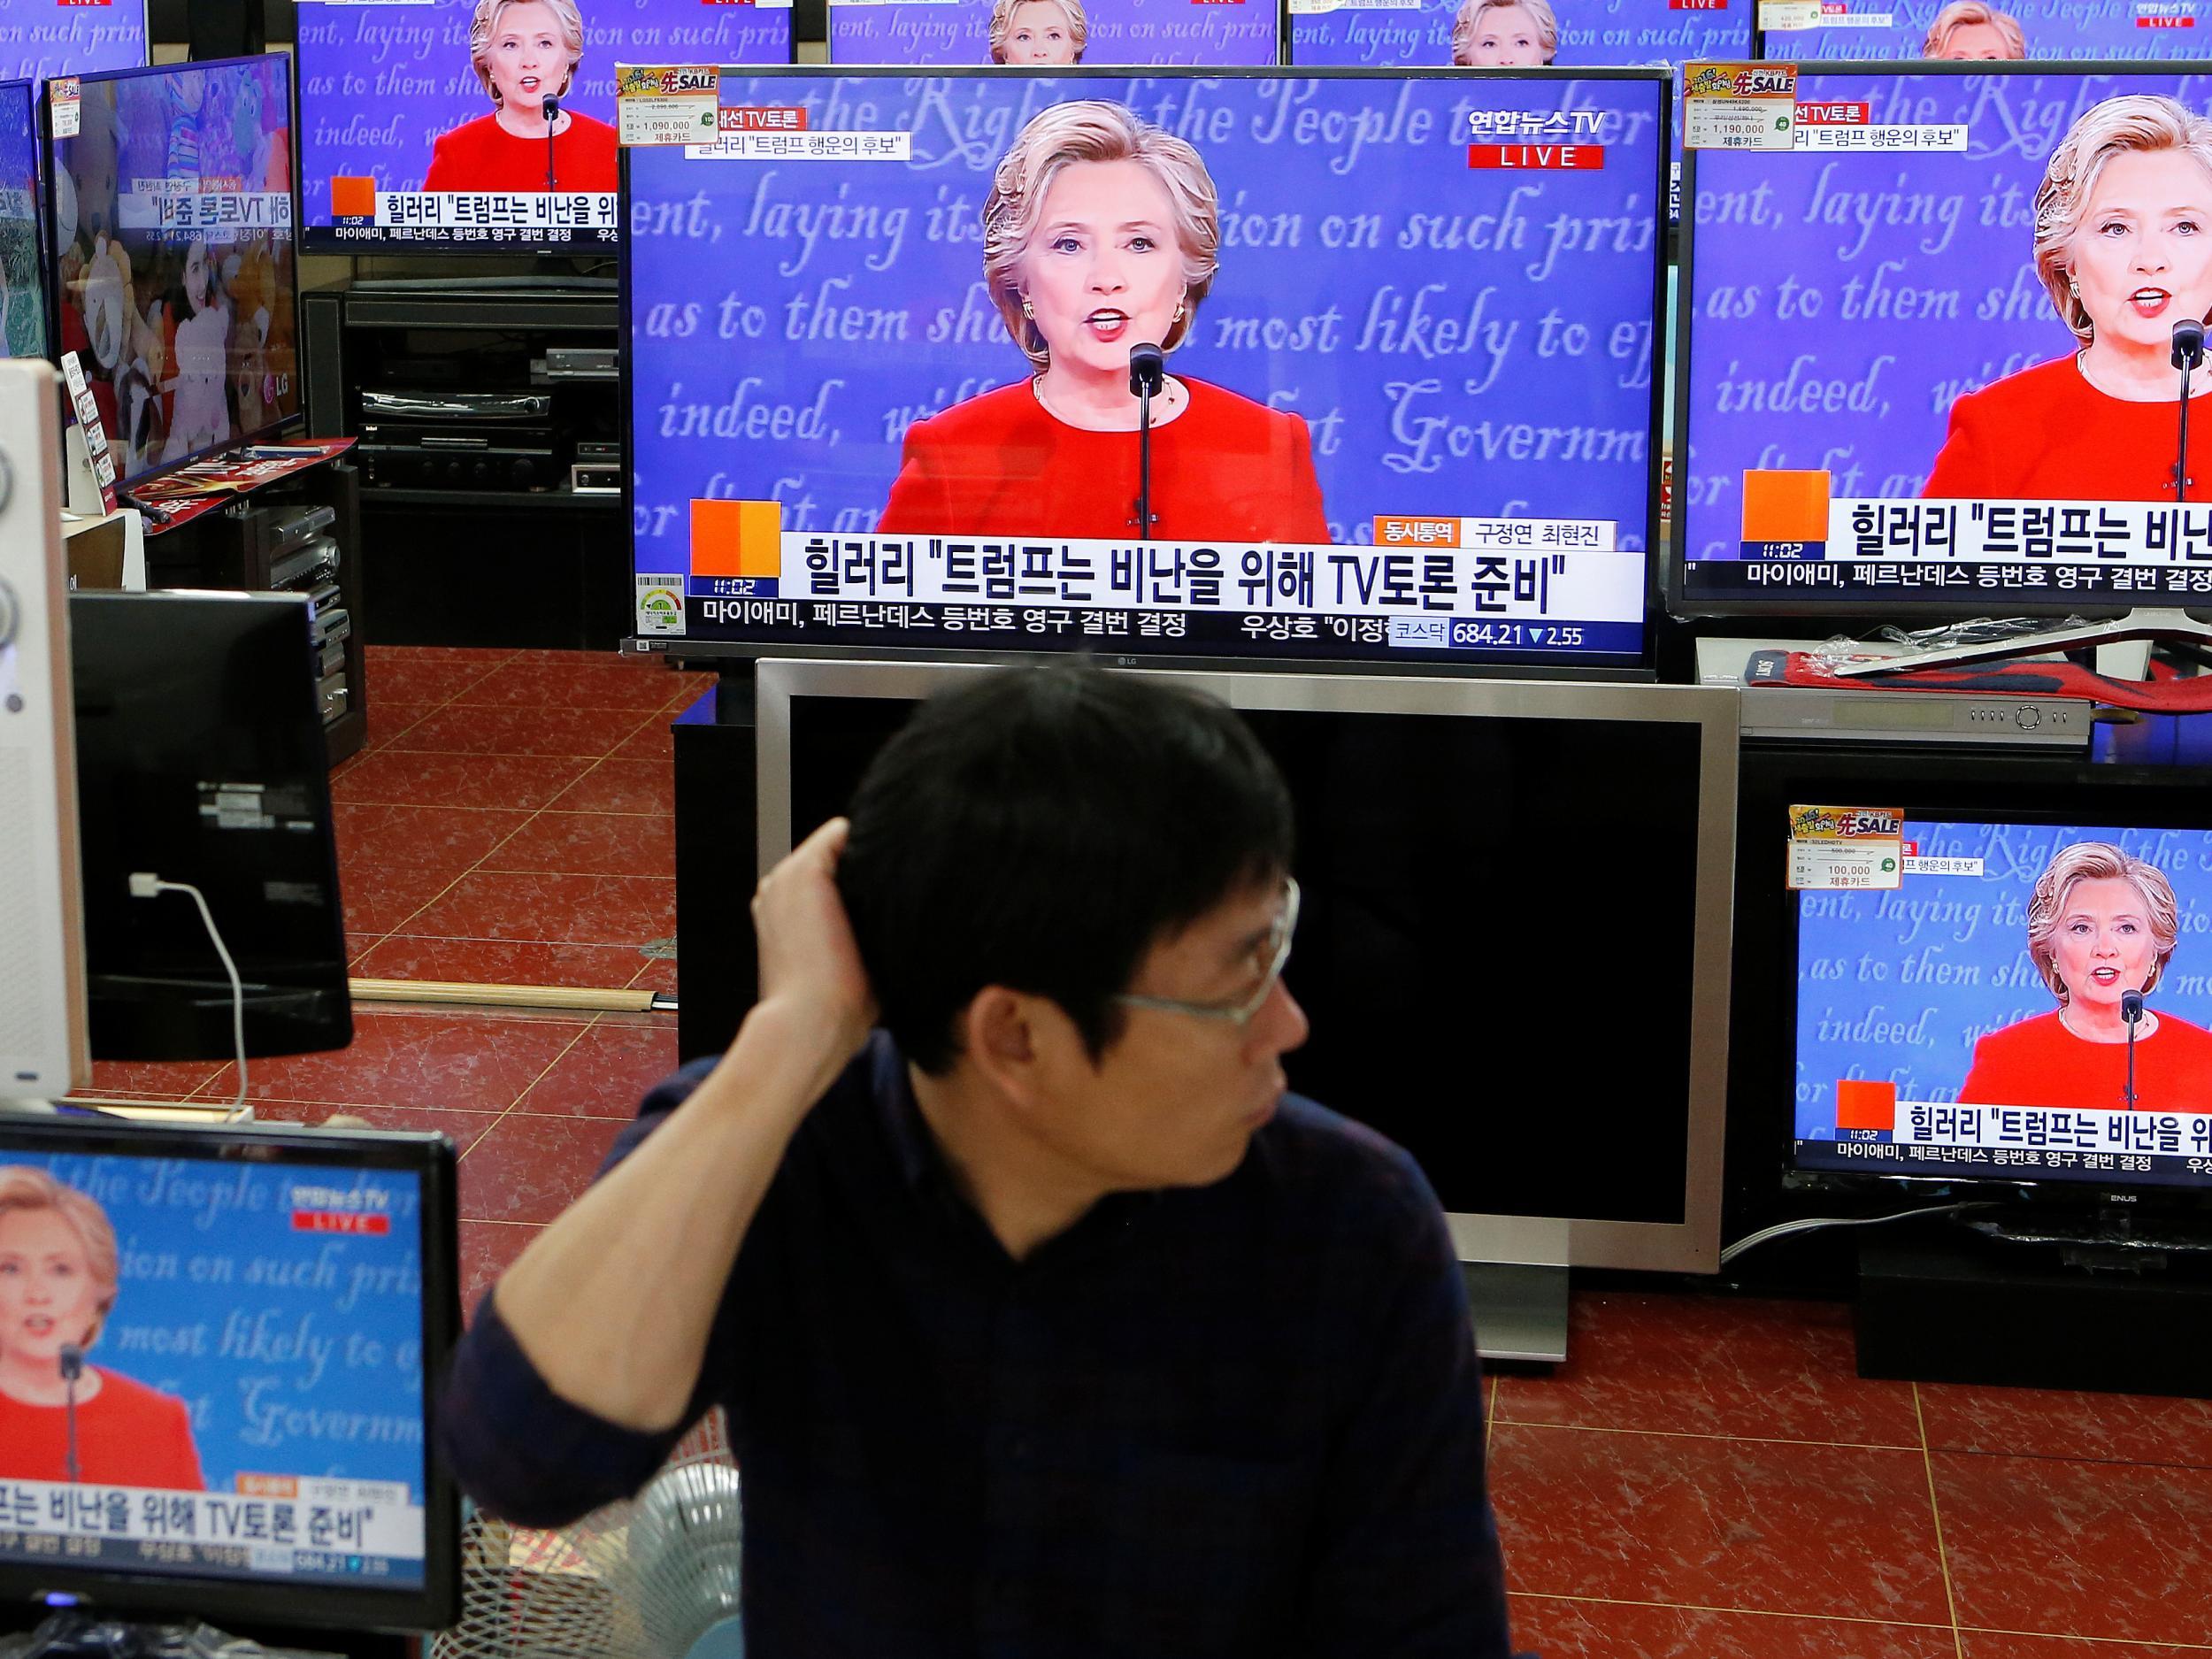 A man watches the US presidential debate in a shop in Korea. The country's Kospi index surged as Hillary Clinton was seen to triumph